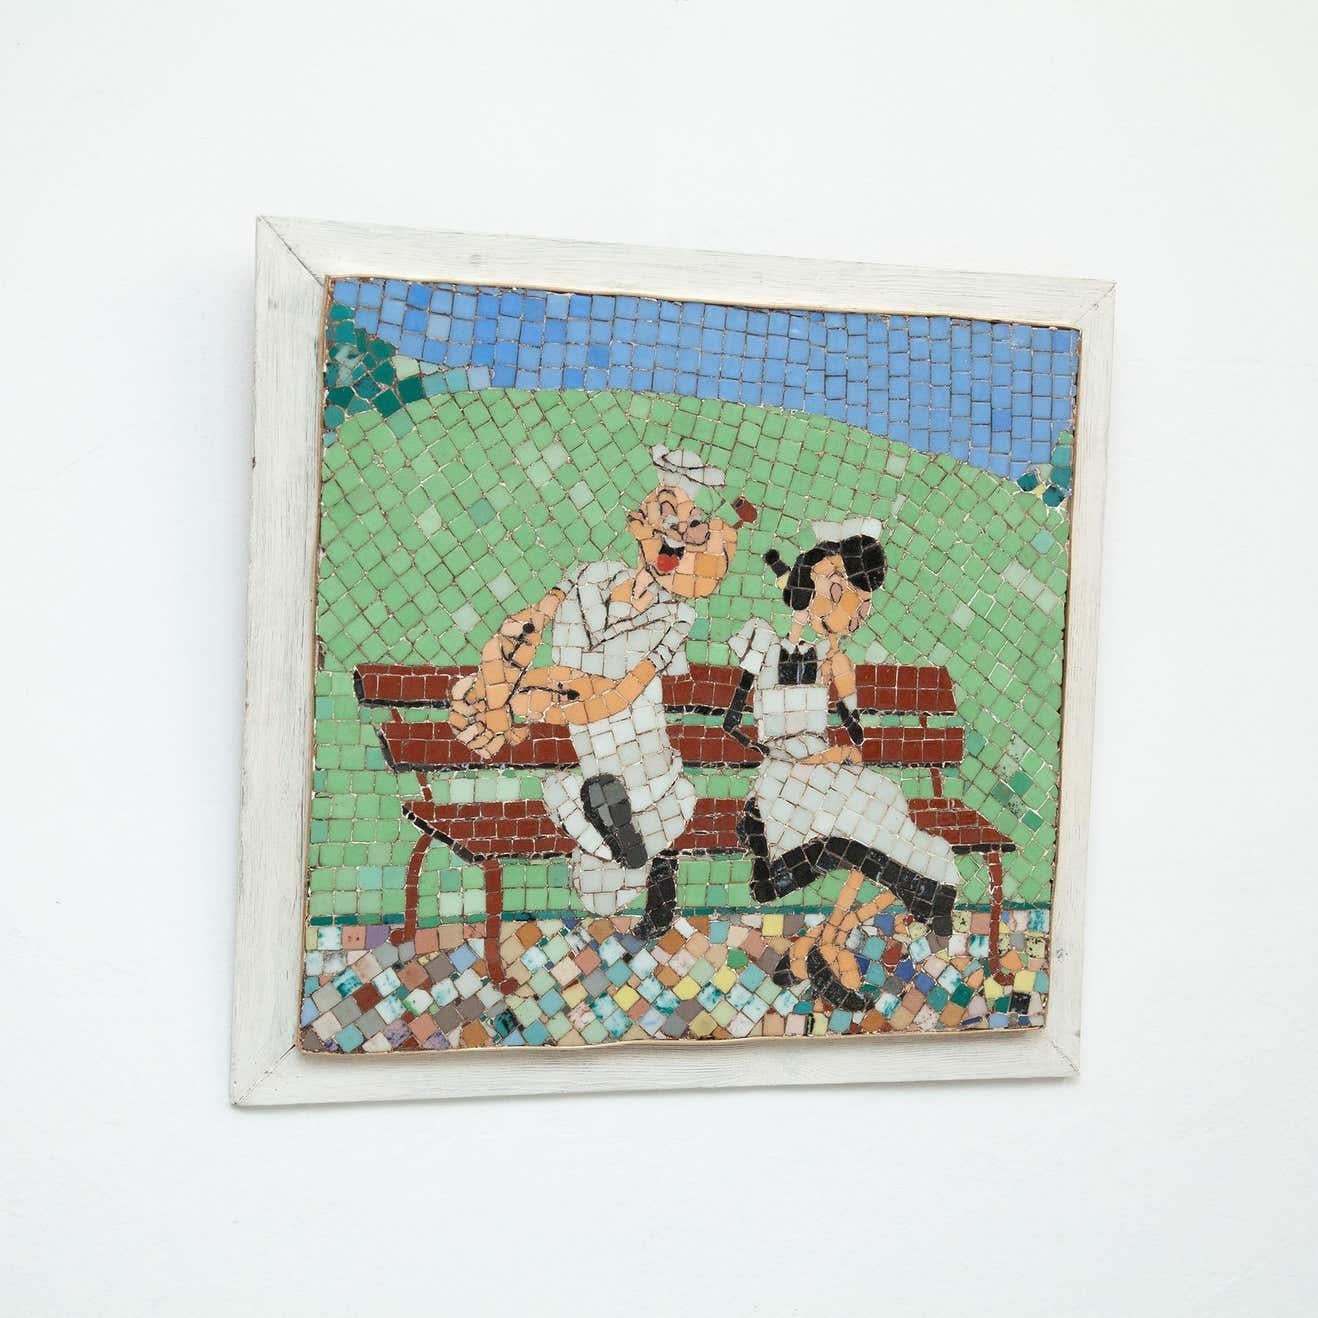 Mosaic Artwork Popeye and Olivia.
By unknown artist from France, circa 1970.

In original condition, with minor wear consistent with age and use, preserving a beautiful patina.

Material:
Creamic
Wood

Dimensions:
D cm x W cm x H cm.